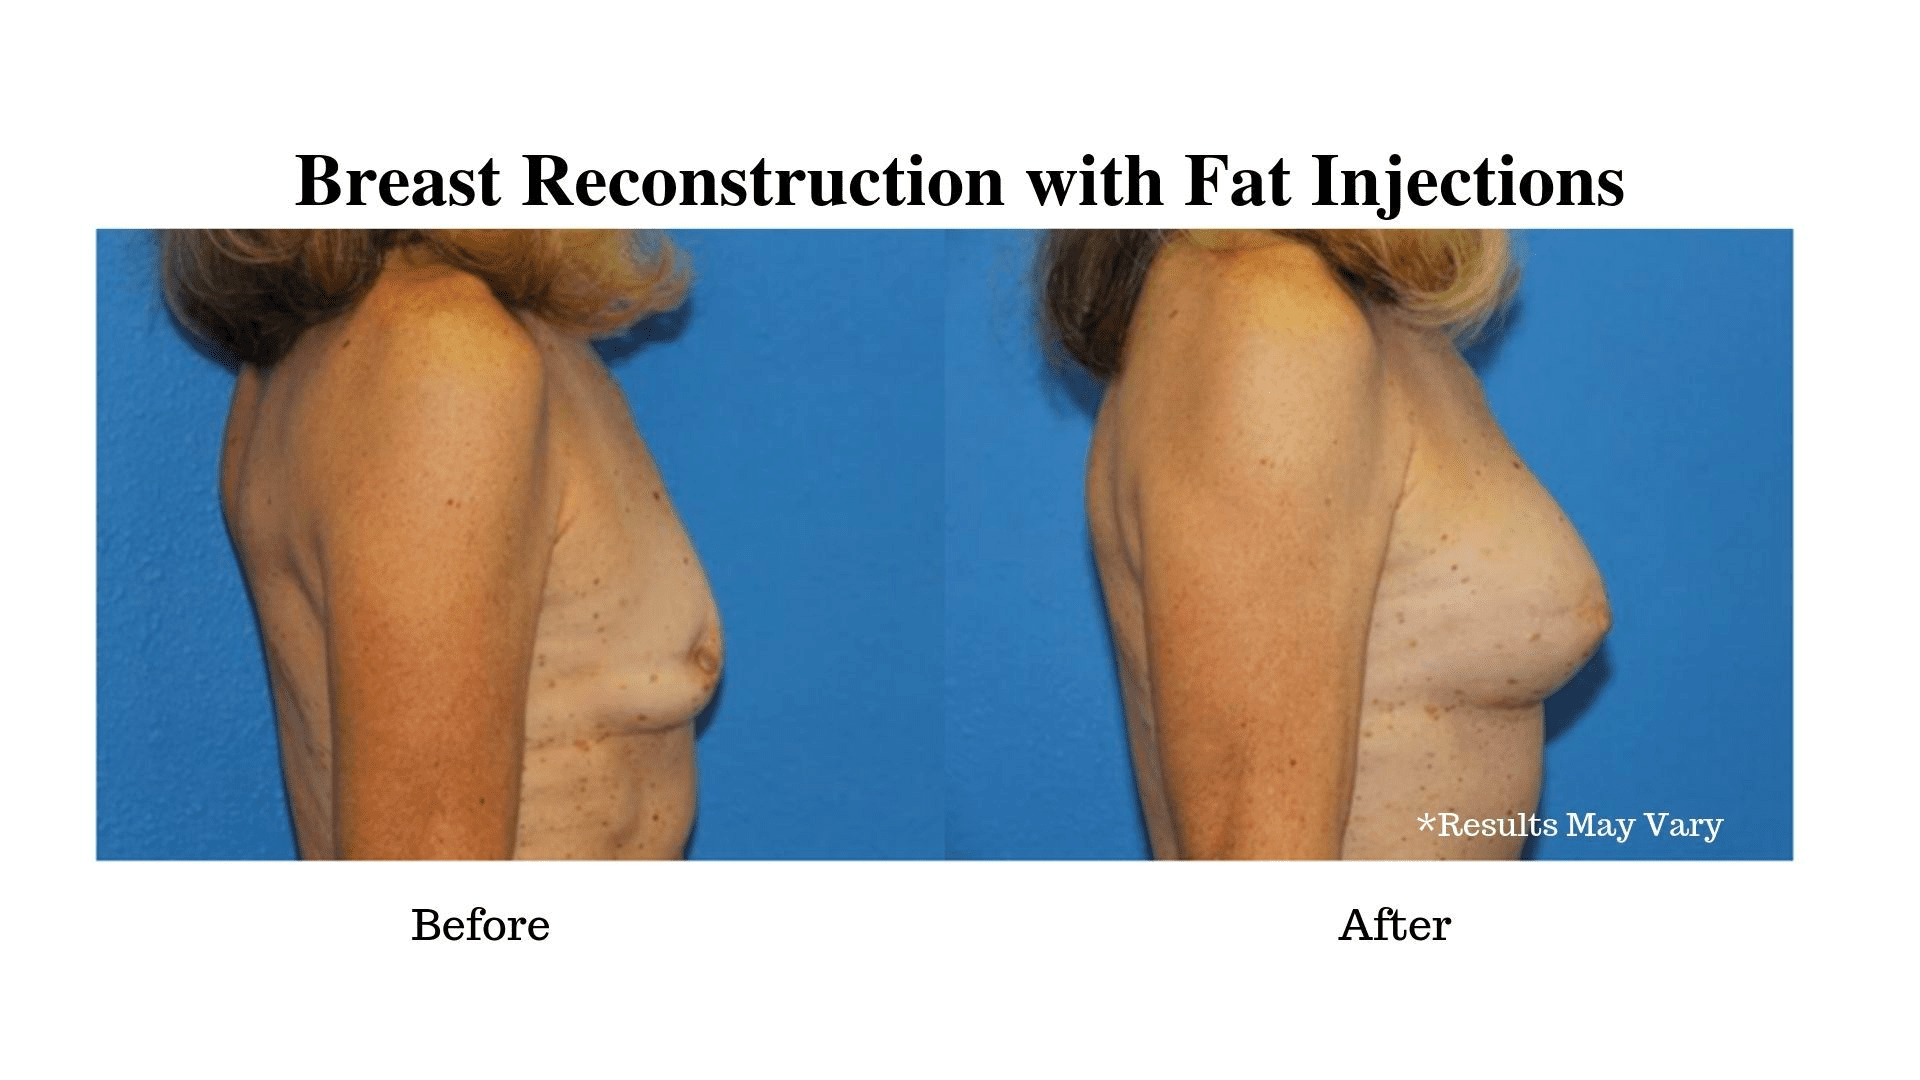 What Are the Benefits of Using Fat Injections for Breast